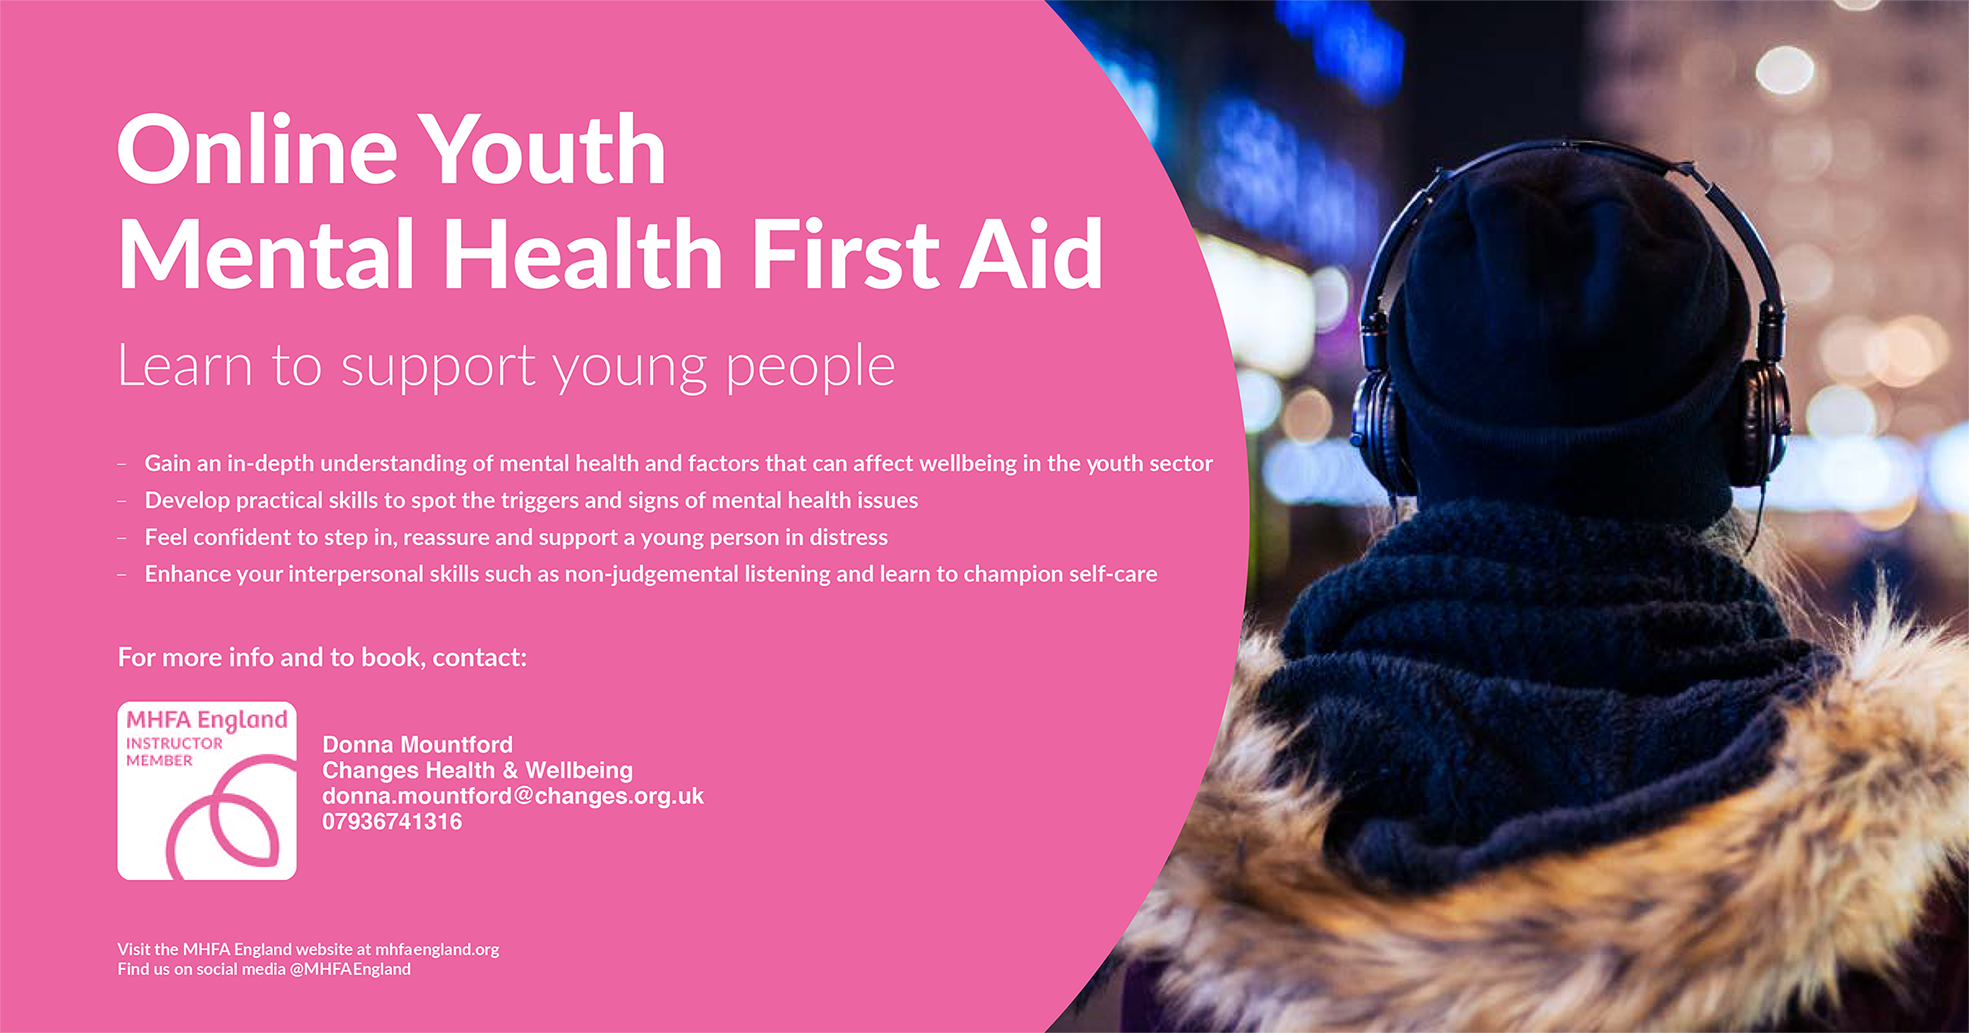 Online Youth Mental Health First Aid Courses